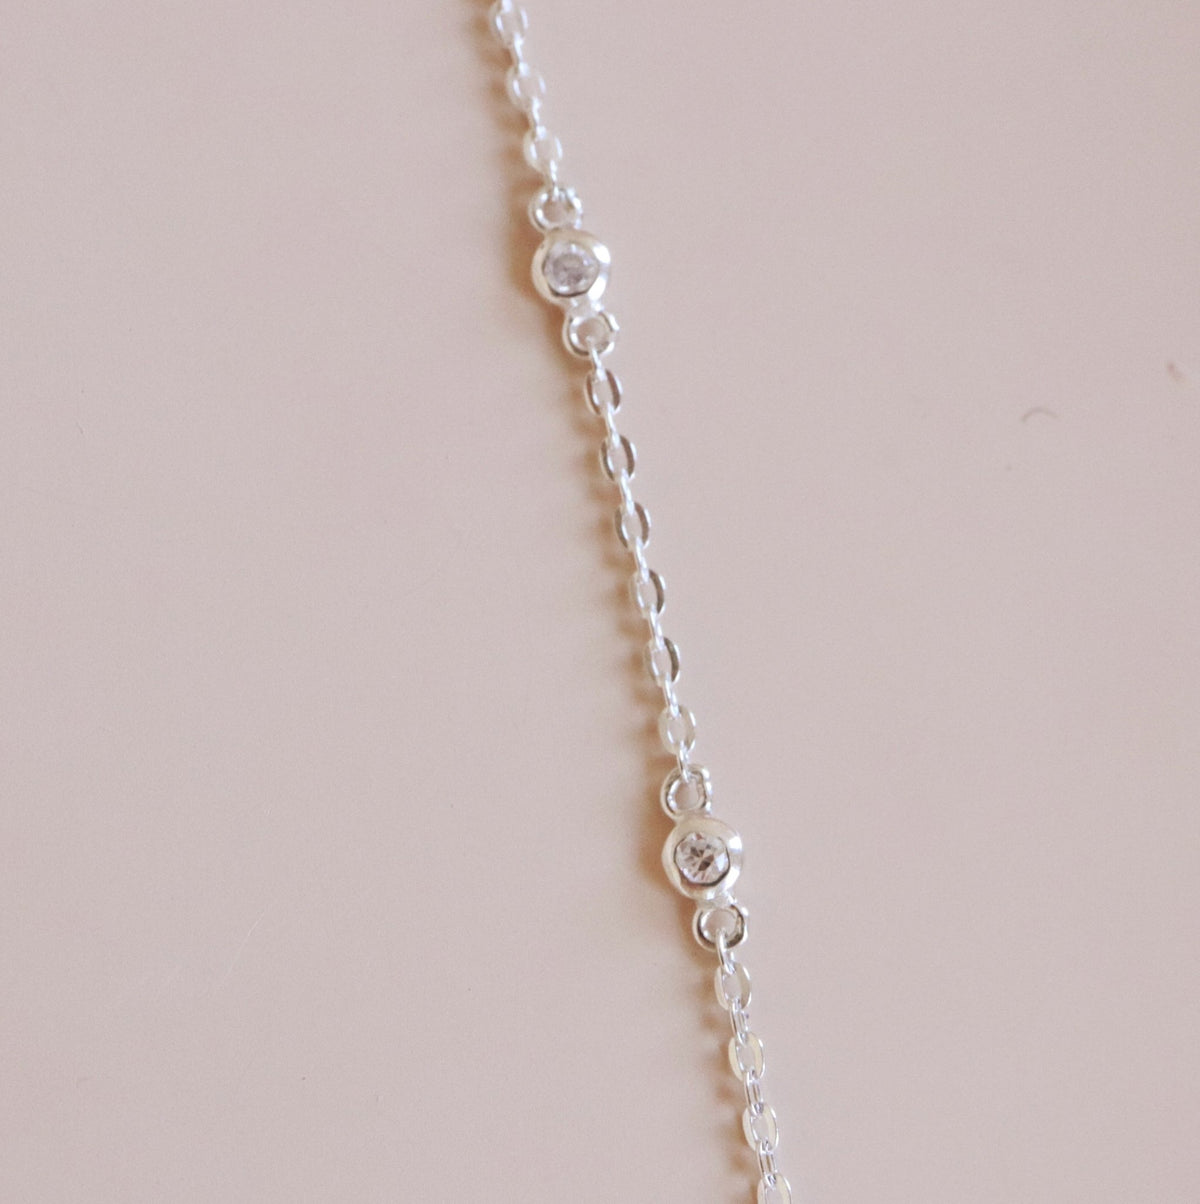 DAY 8 - DAINTY RADIANT LARIAT NECKLACE - CUBIC ZIRCONIA - SO PRETTY CARA COTTER